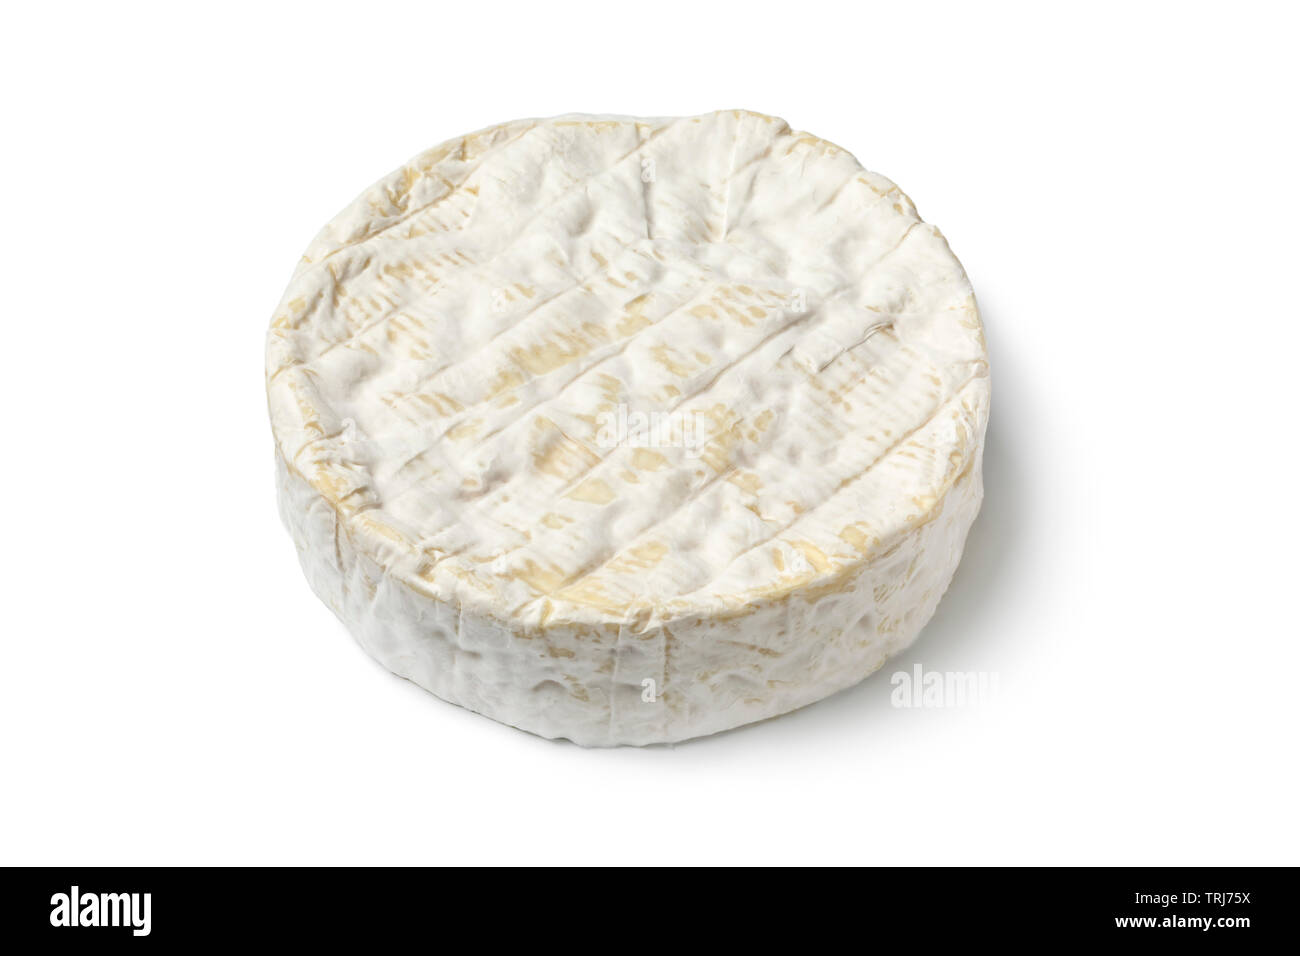 Single whole round french Brie cheese isolated on white background Stock Photo